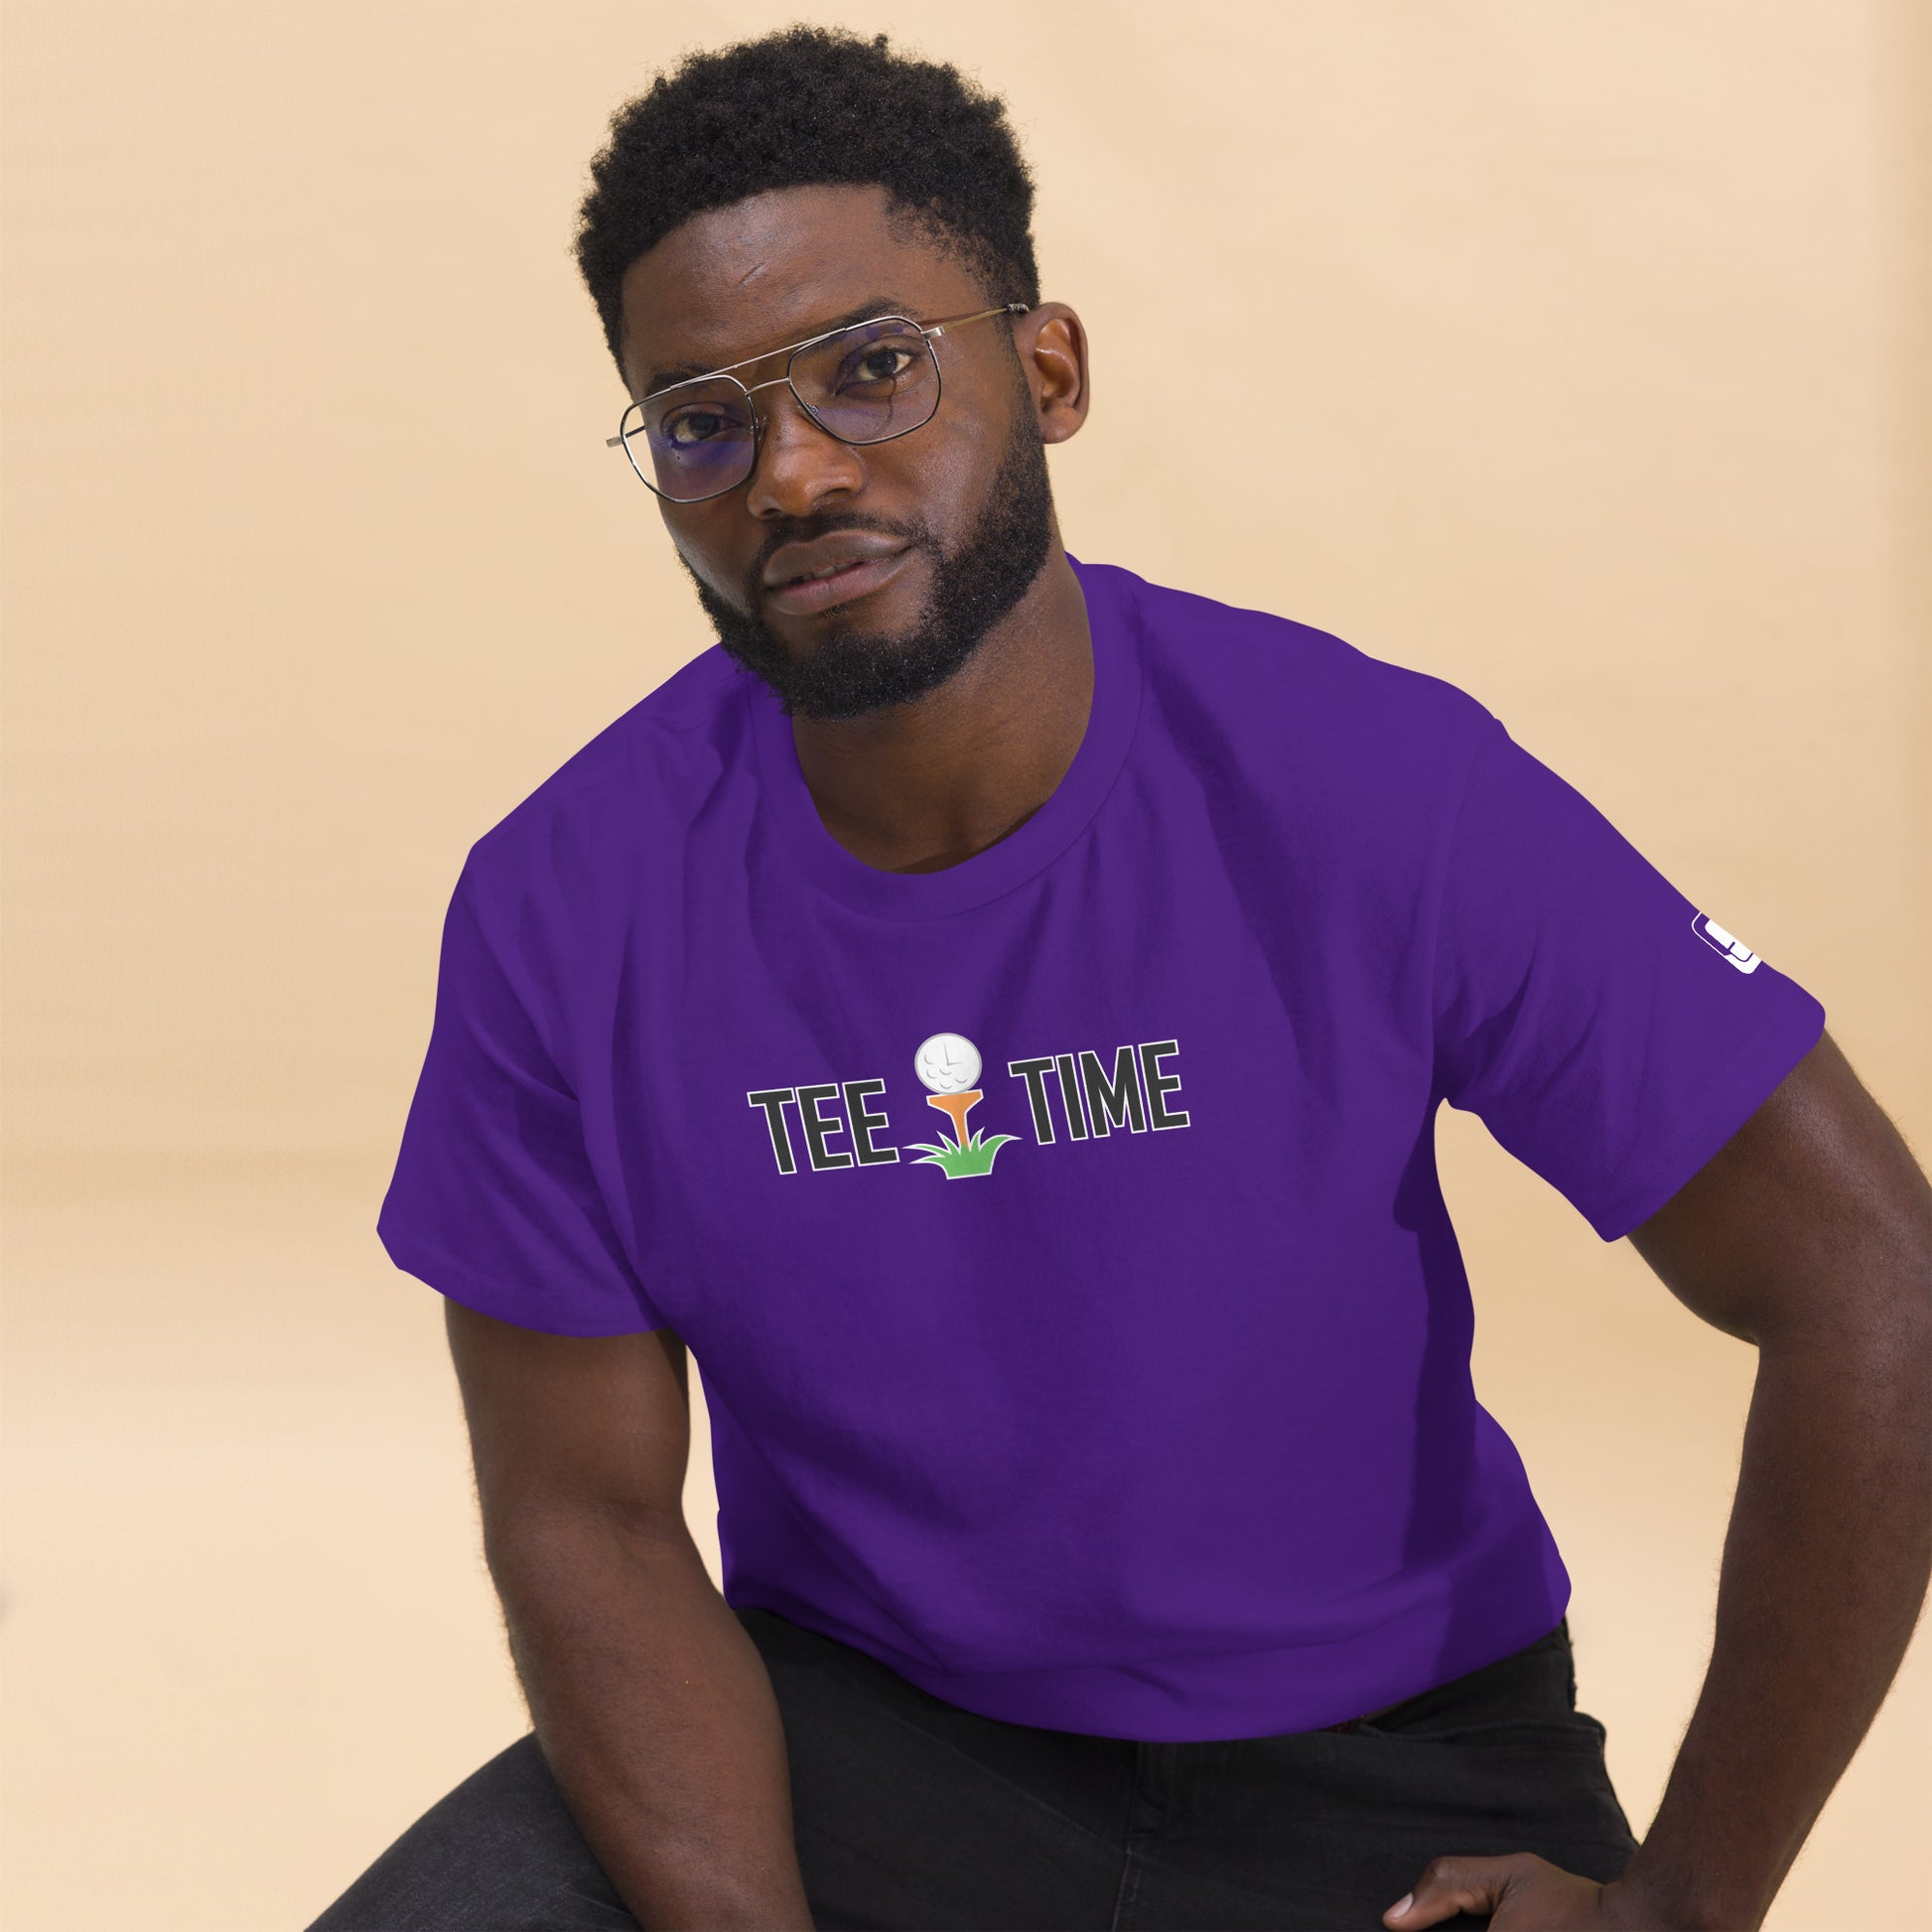  A man wearing glasses poses in a vibrant purple t-shirt with a "TEE TIME" logo featuring a golf ball and tee. The design is placed centrally on the chest. His expression is thoughtful, and he's looking directly at the viewer. A small logo is visible on the sleeve. He pairs the shirt with black pants against a soft beige background, giving the image a warm, approachable feel while highlighting the bold shirt color and crisp design.